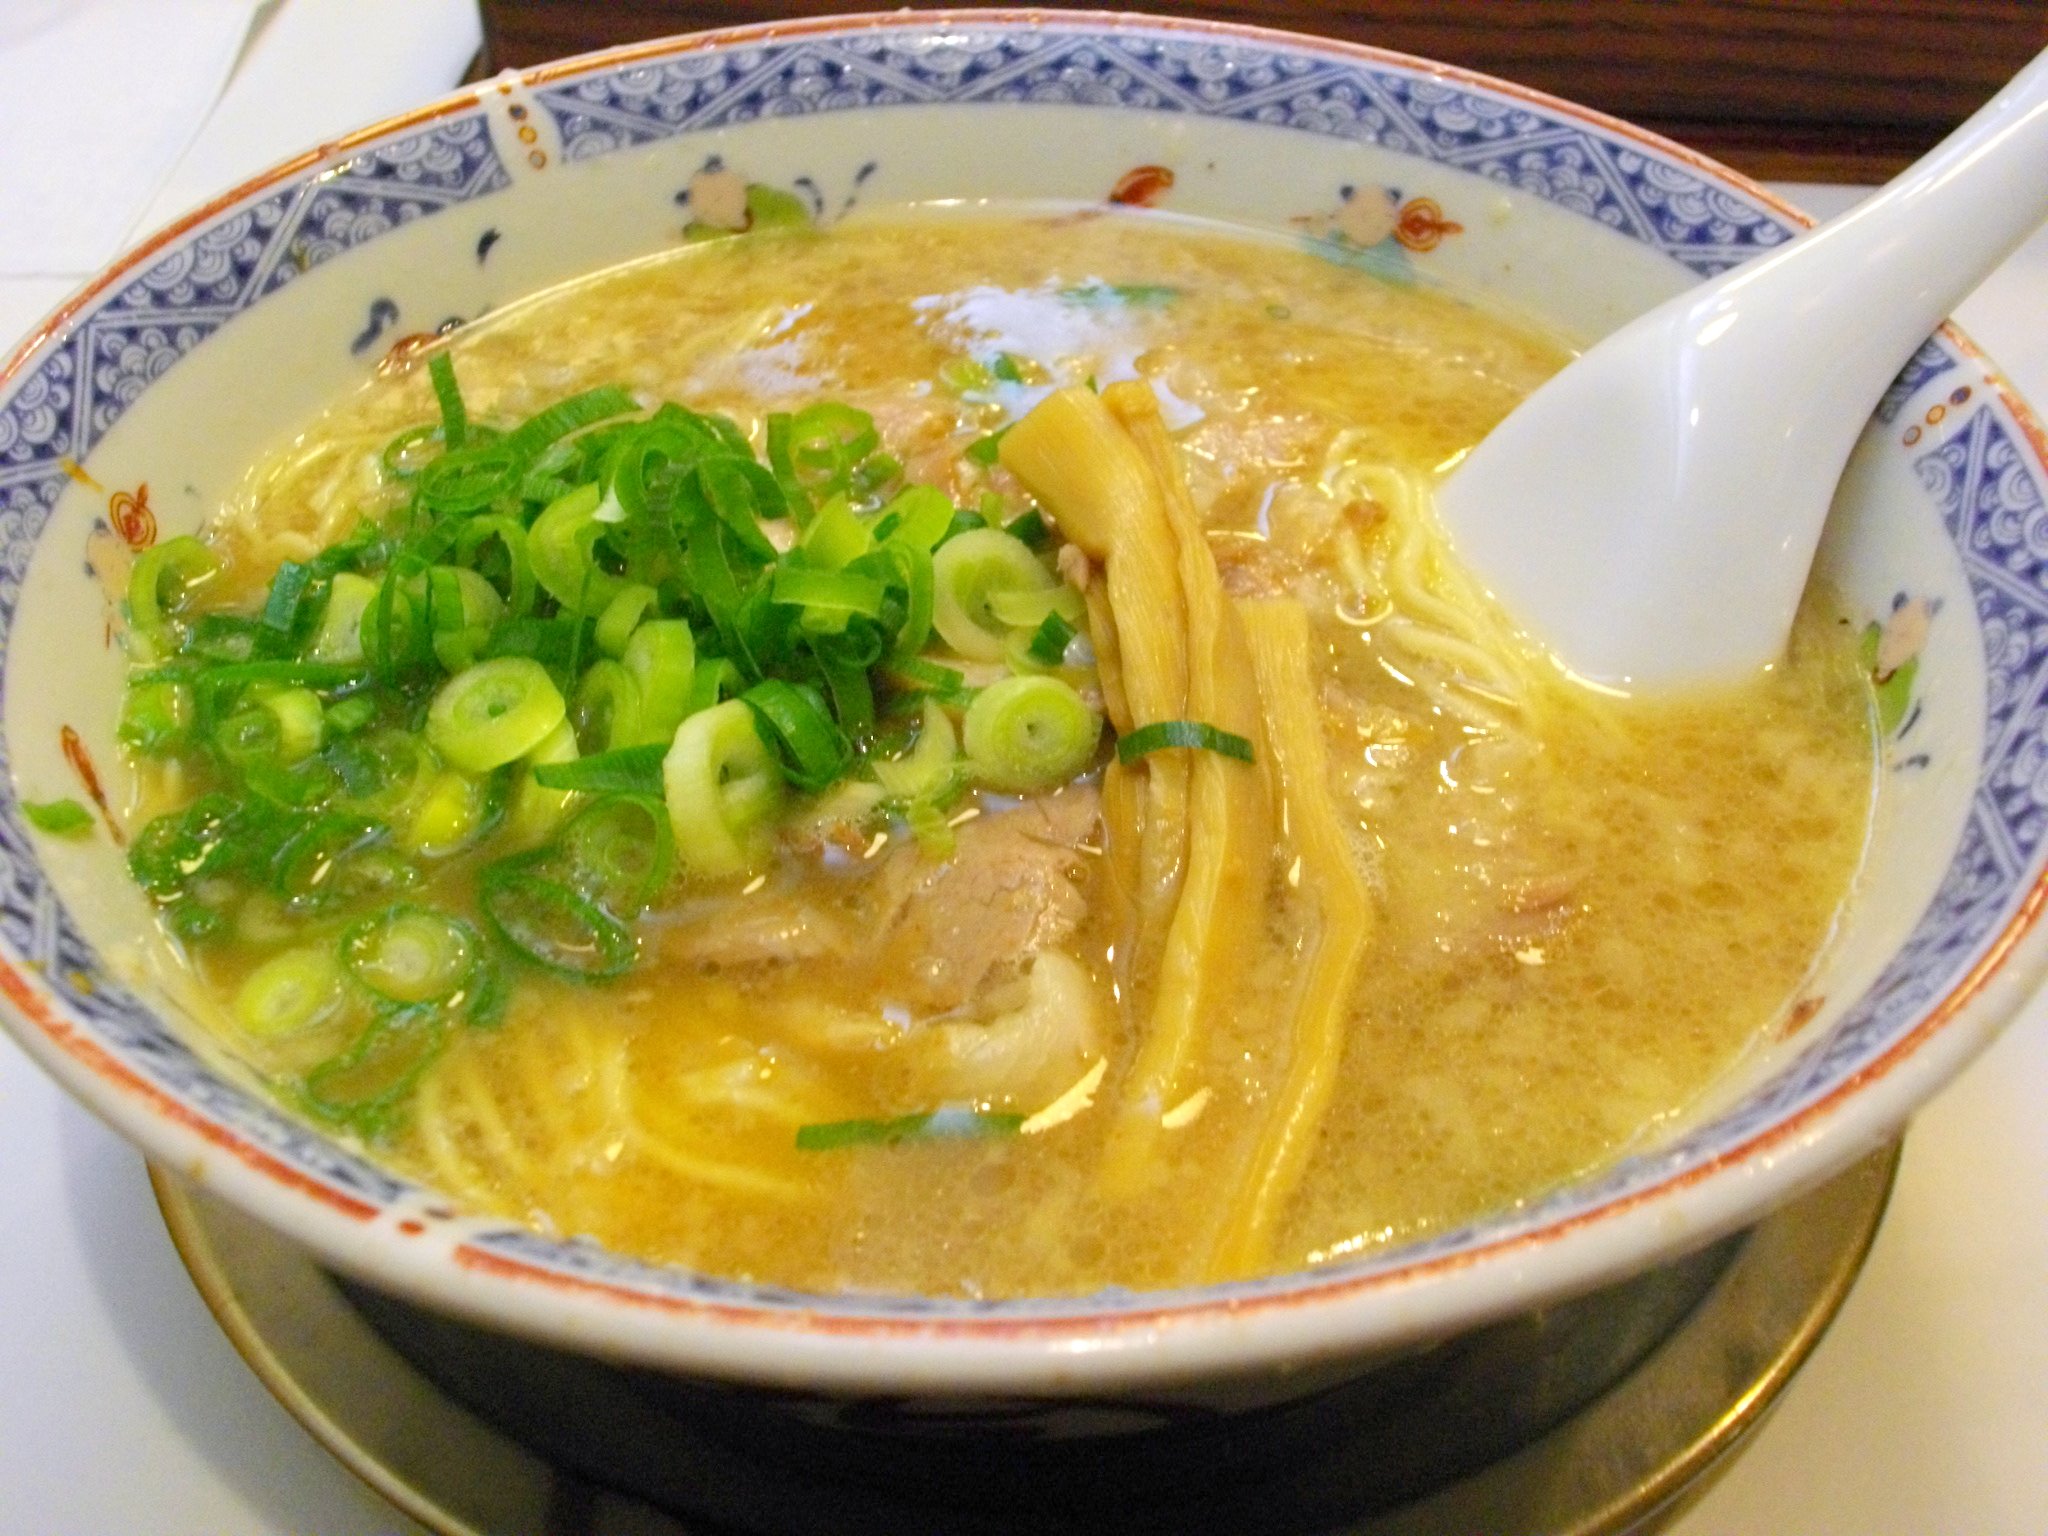 an ornate bowl of soup with noodles and green onions